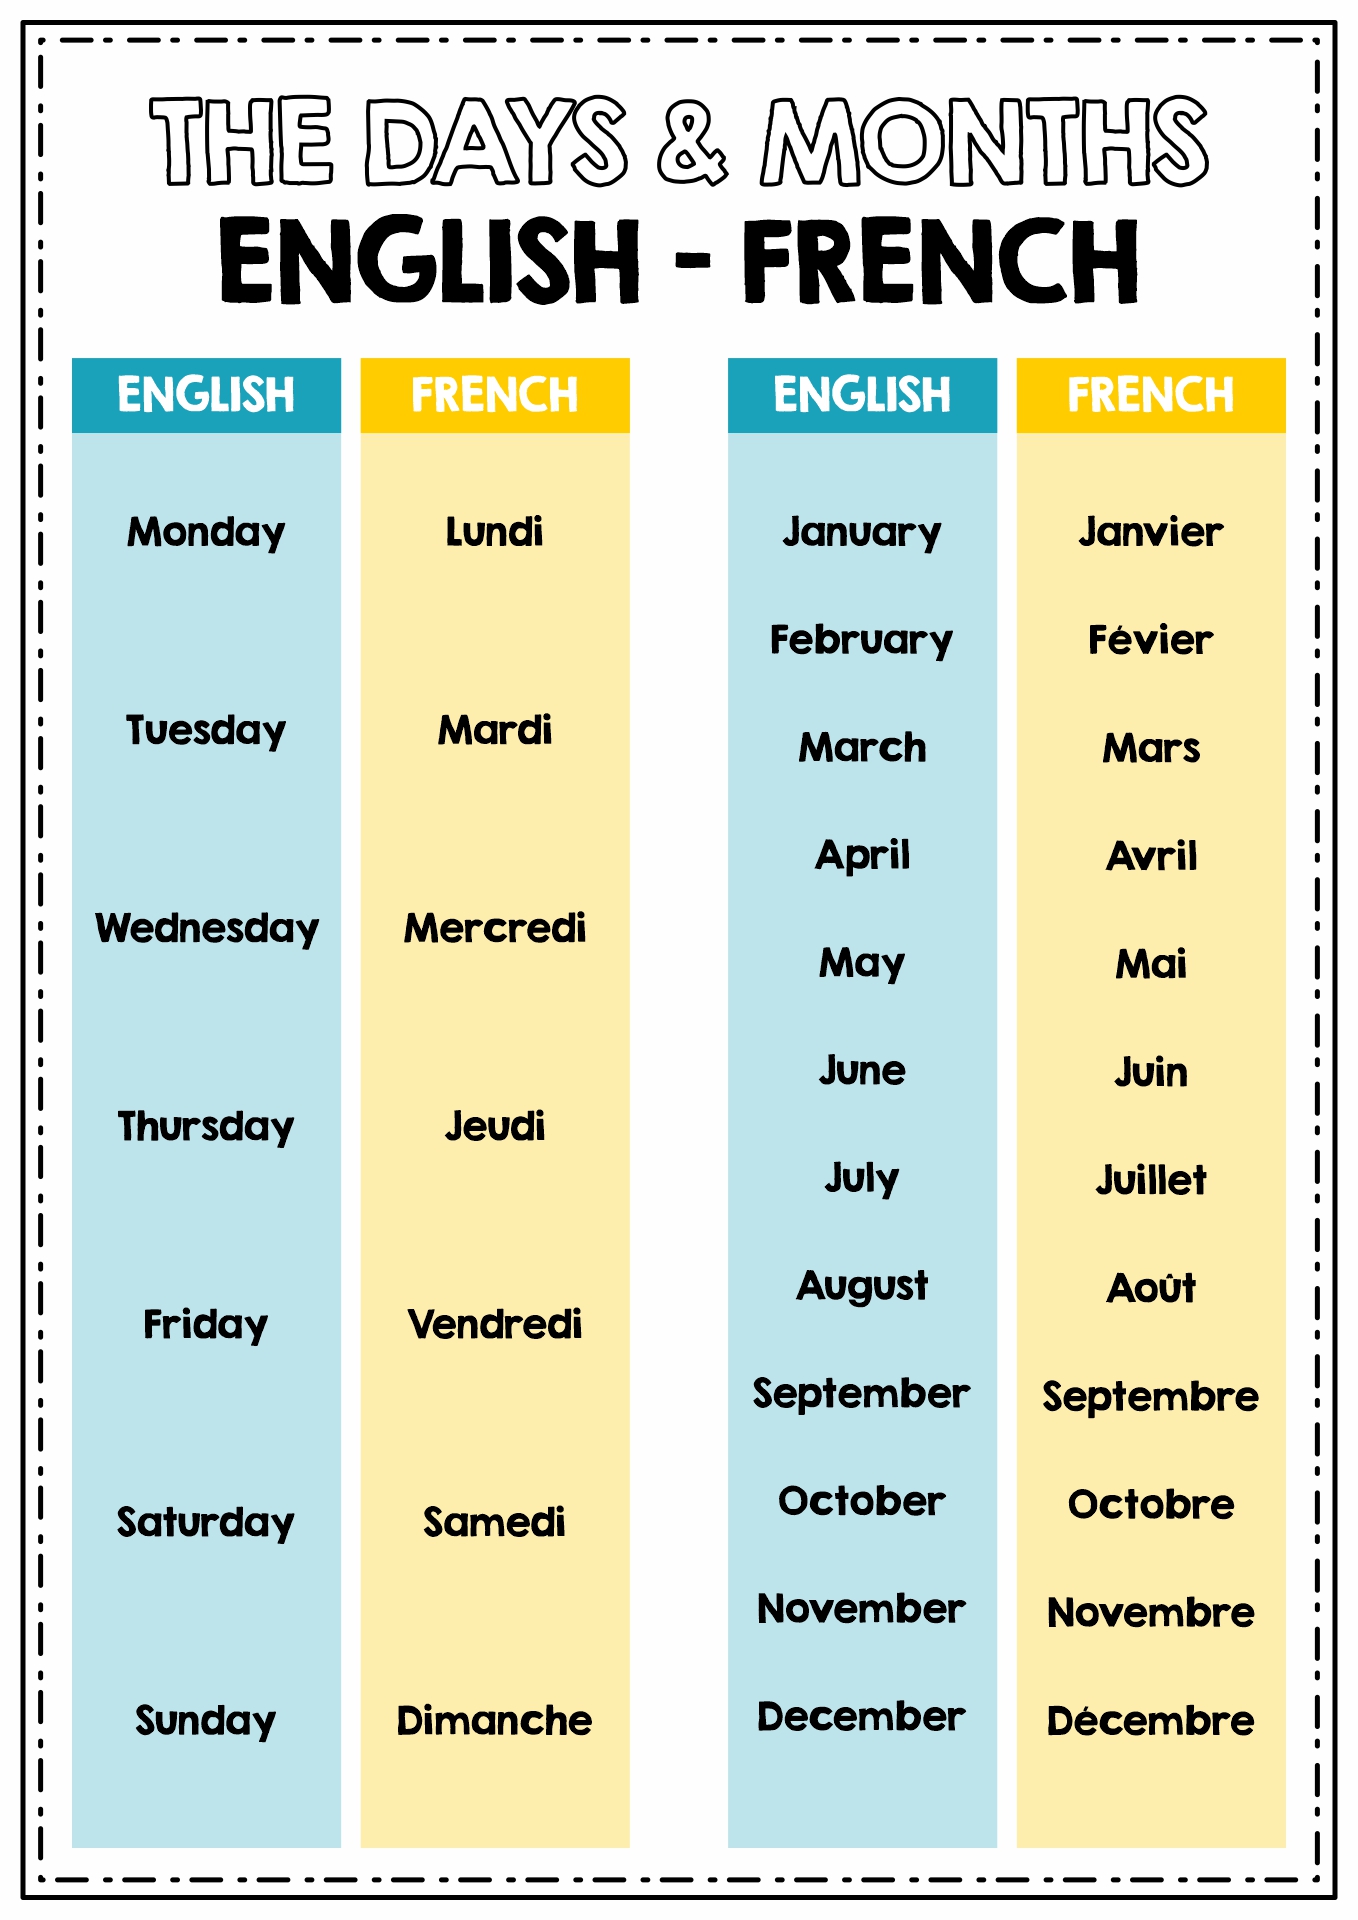 French Months and Days Image